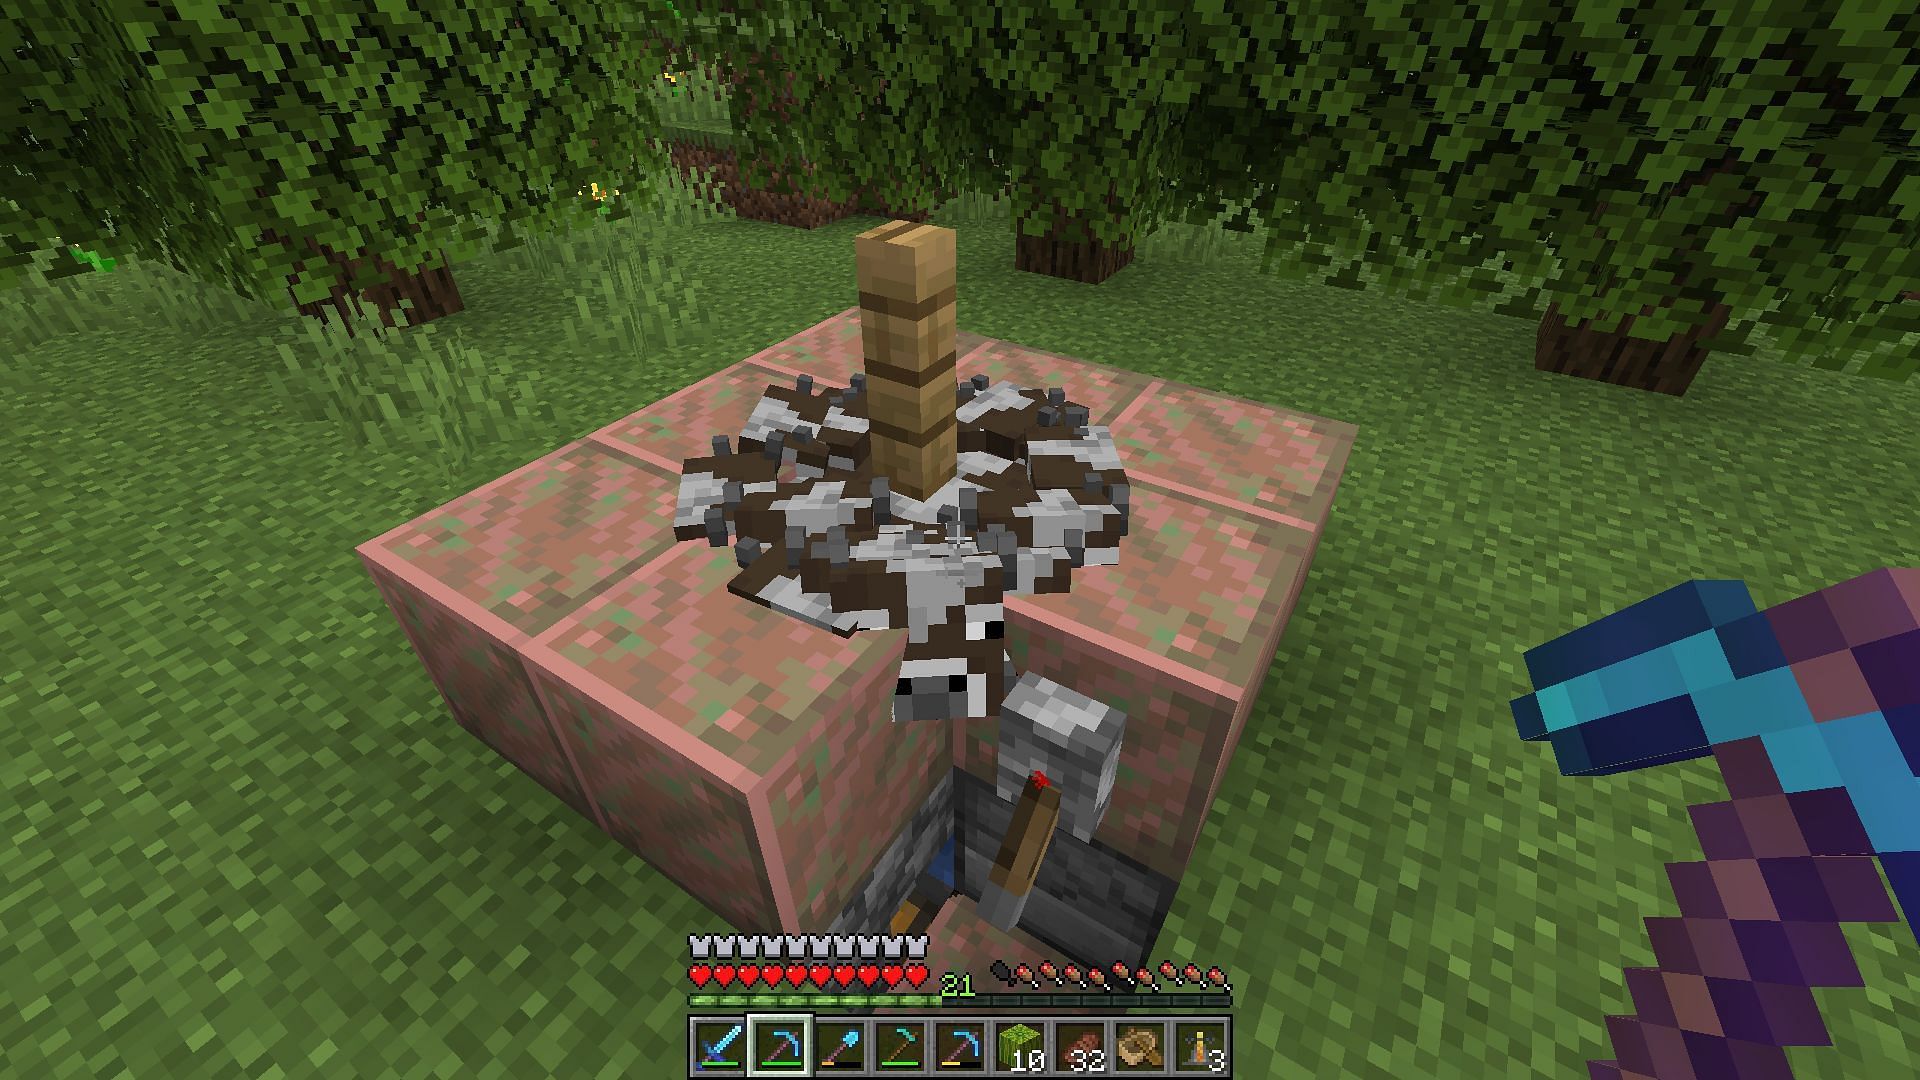 Cow crushers are the most common example of entity cramming (Image via Mojang)